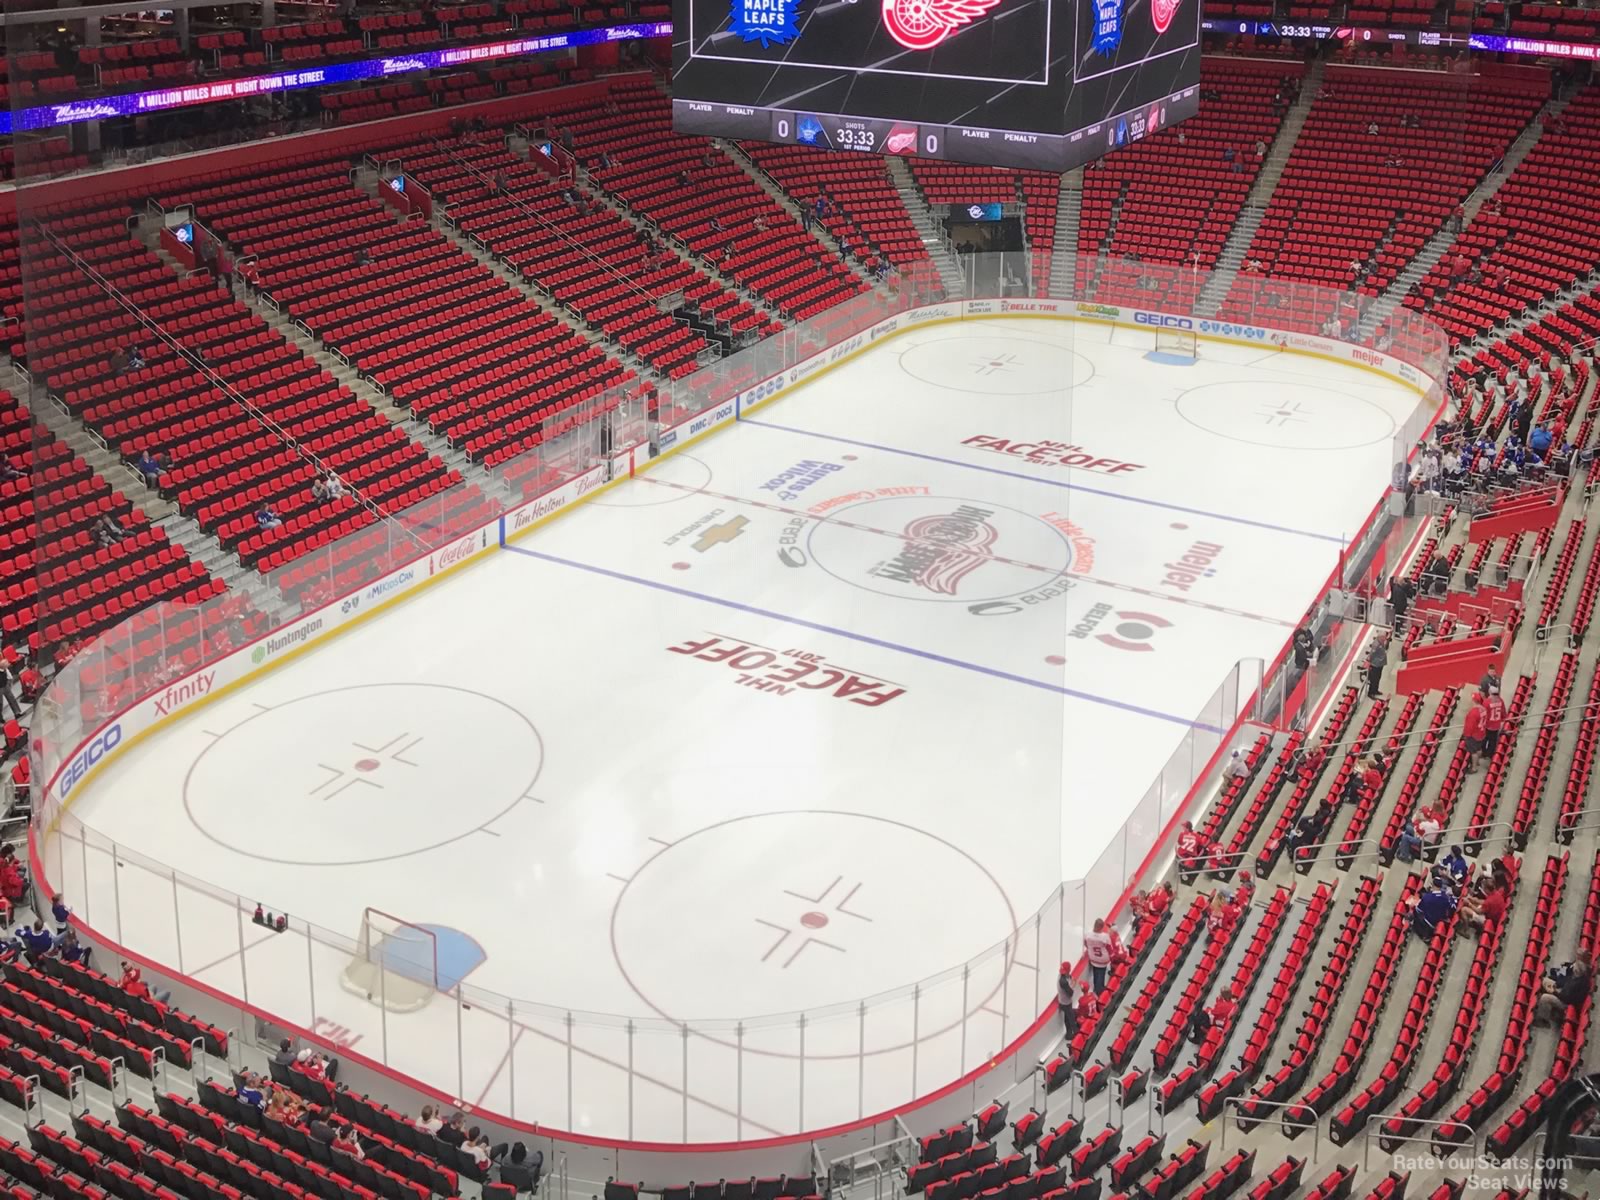 section 232, row 8 seat view  for hockey - little caesars arena